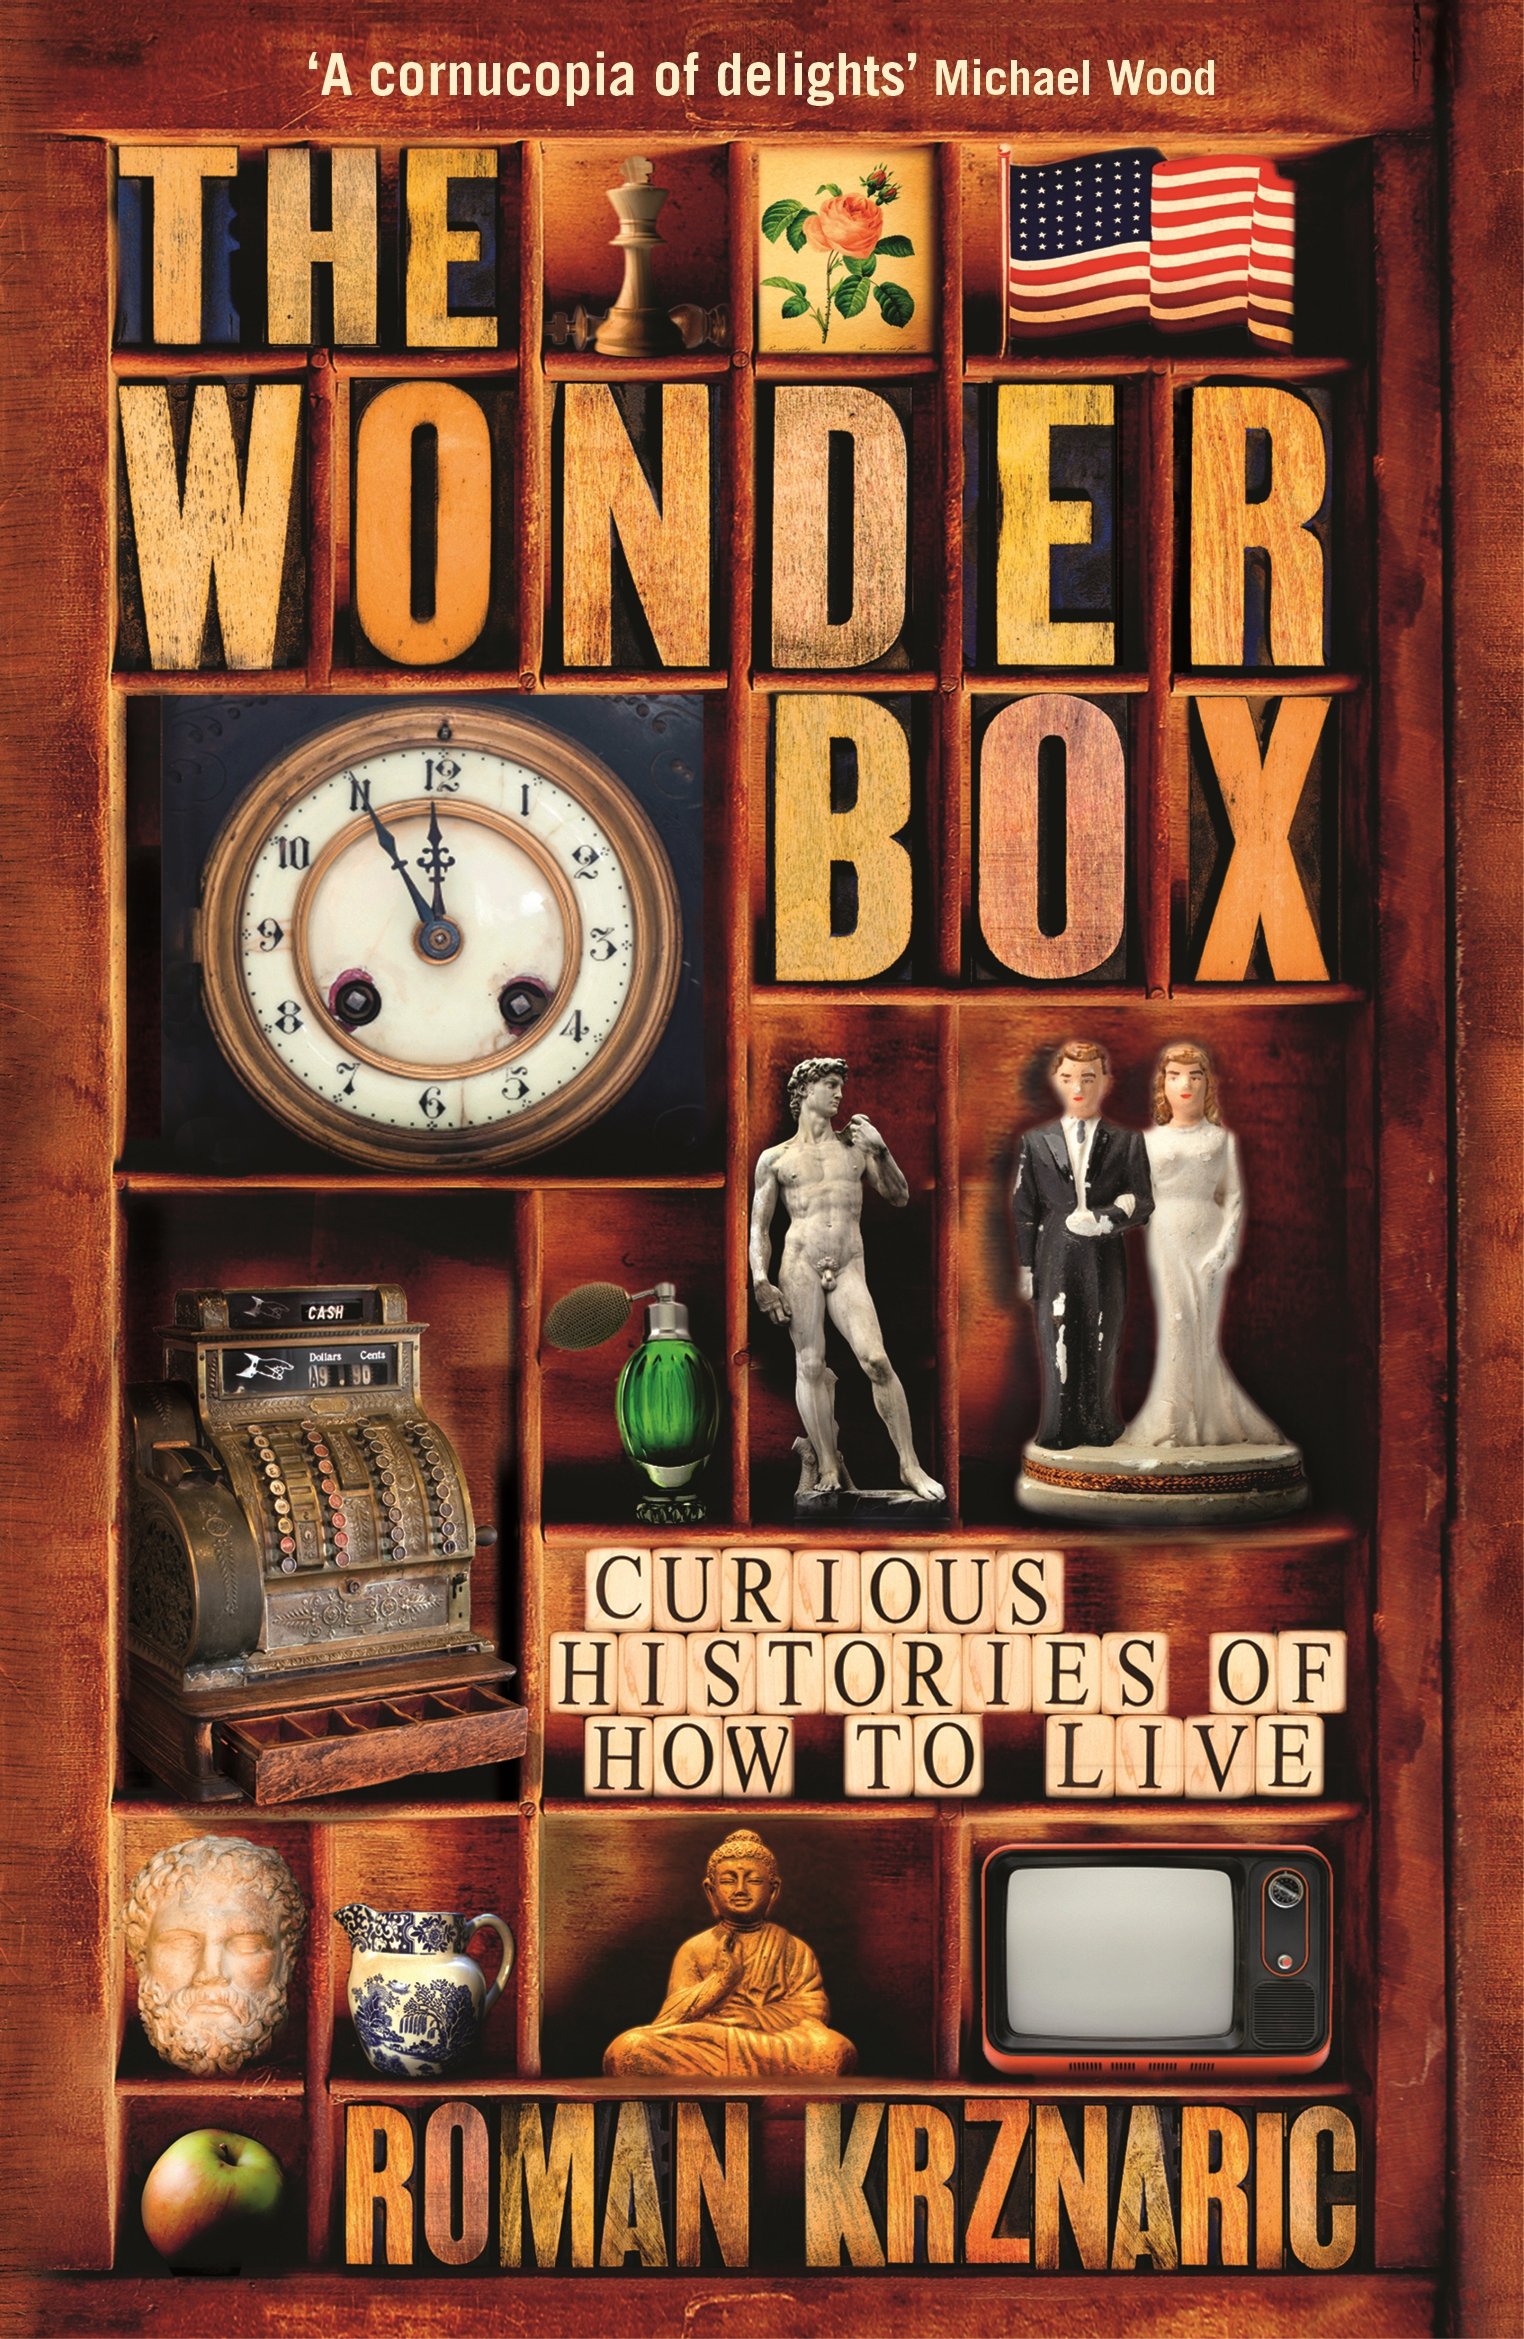 The Wonderbox: Curious Histories of How to Live by Roman Krznaric.